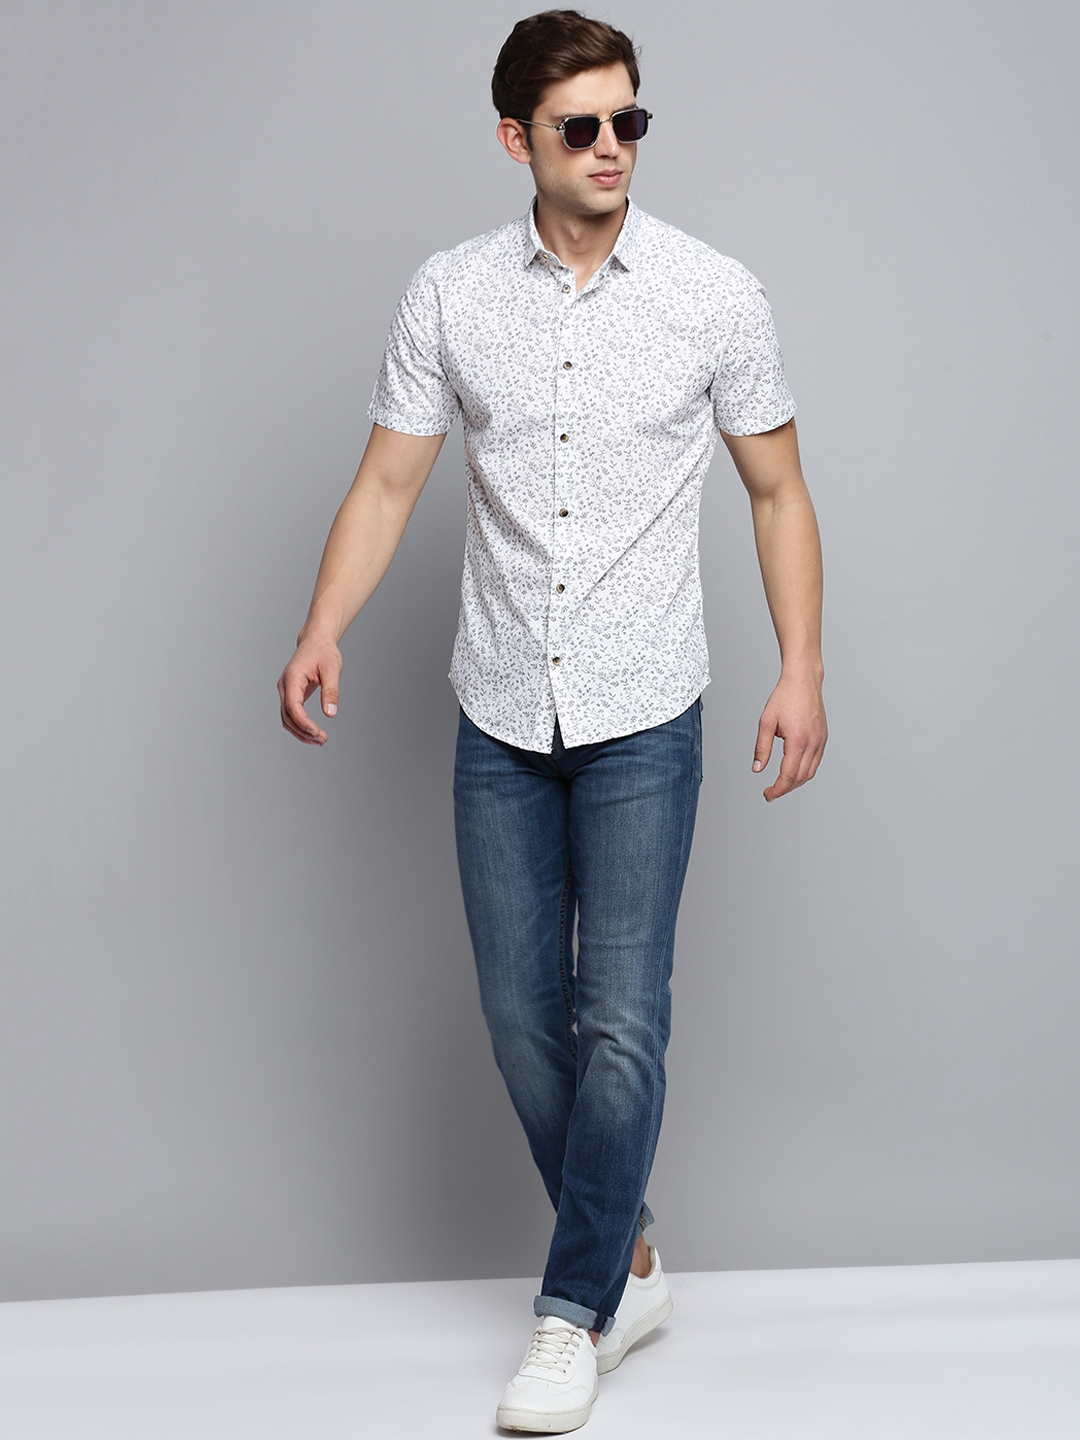 Showoff | SHOWOFF Men's Spread Collar Solid White Classic Shirt 4